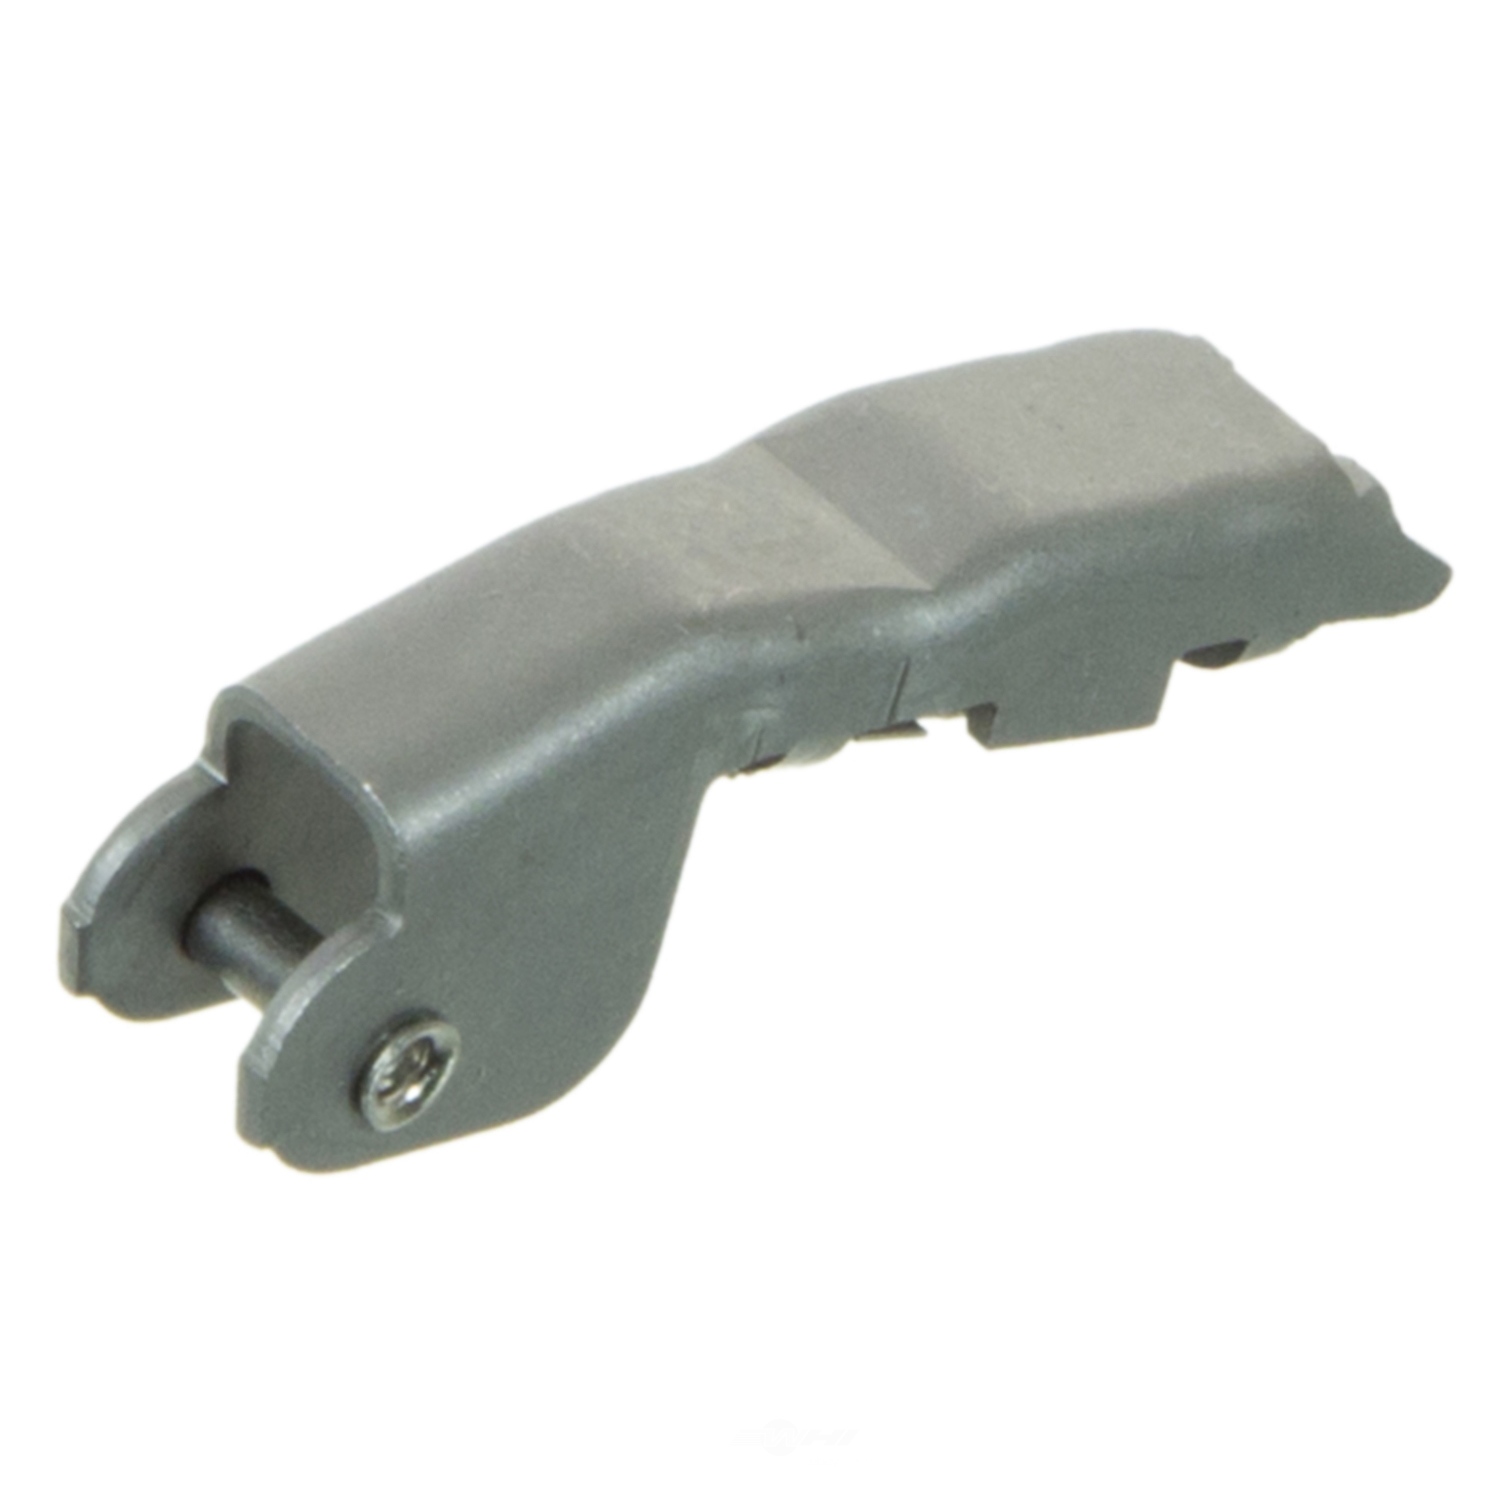 ANCO WIPER PRODUCTS - Wiper Blade Adapter - ANC 47-63